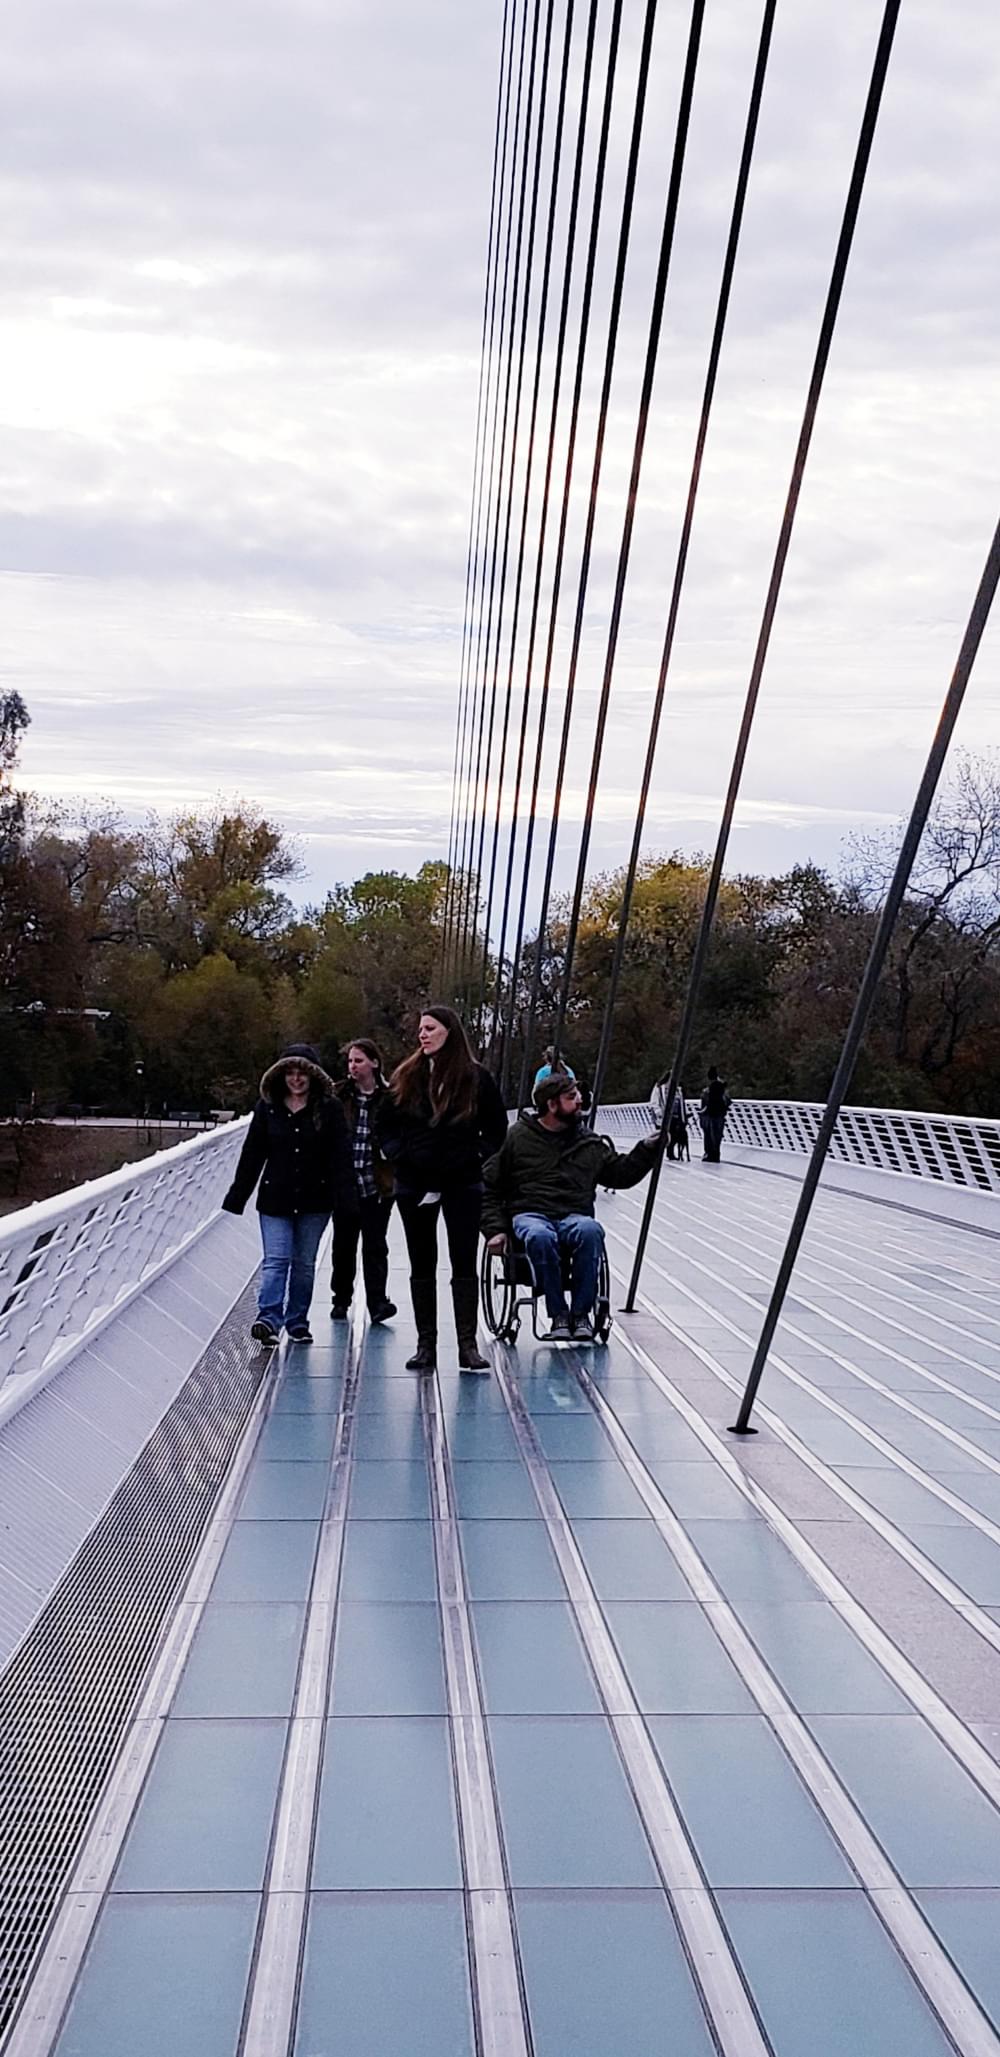 The Sundial Bridge in Redding, California joins two sides of the Sacramento River Trail. The bridge is fully accessible.